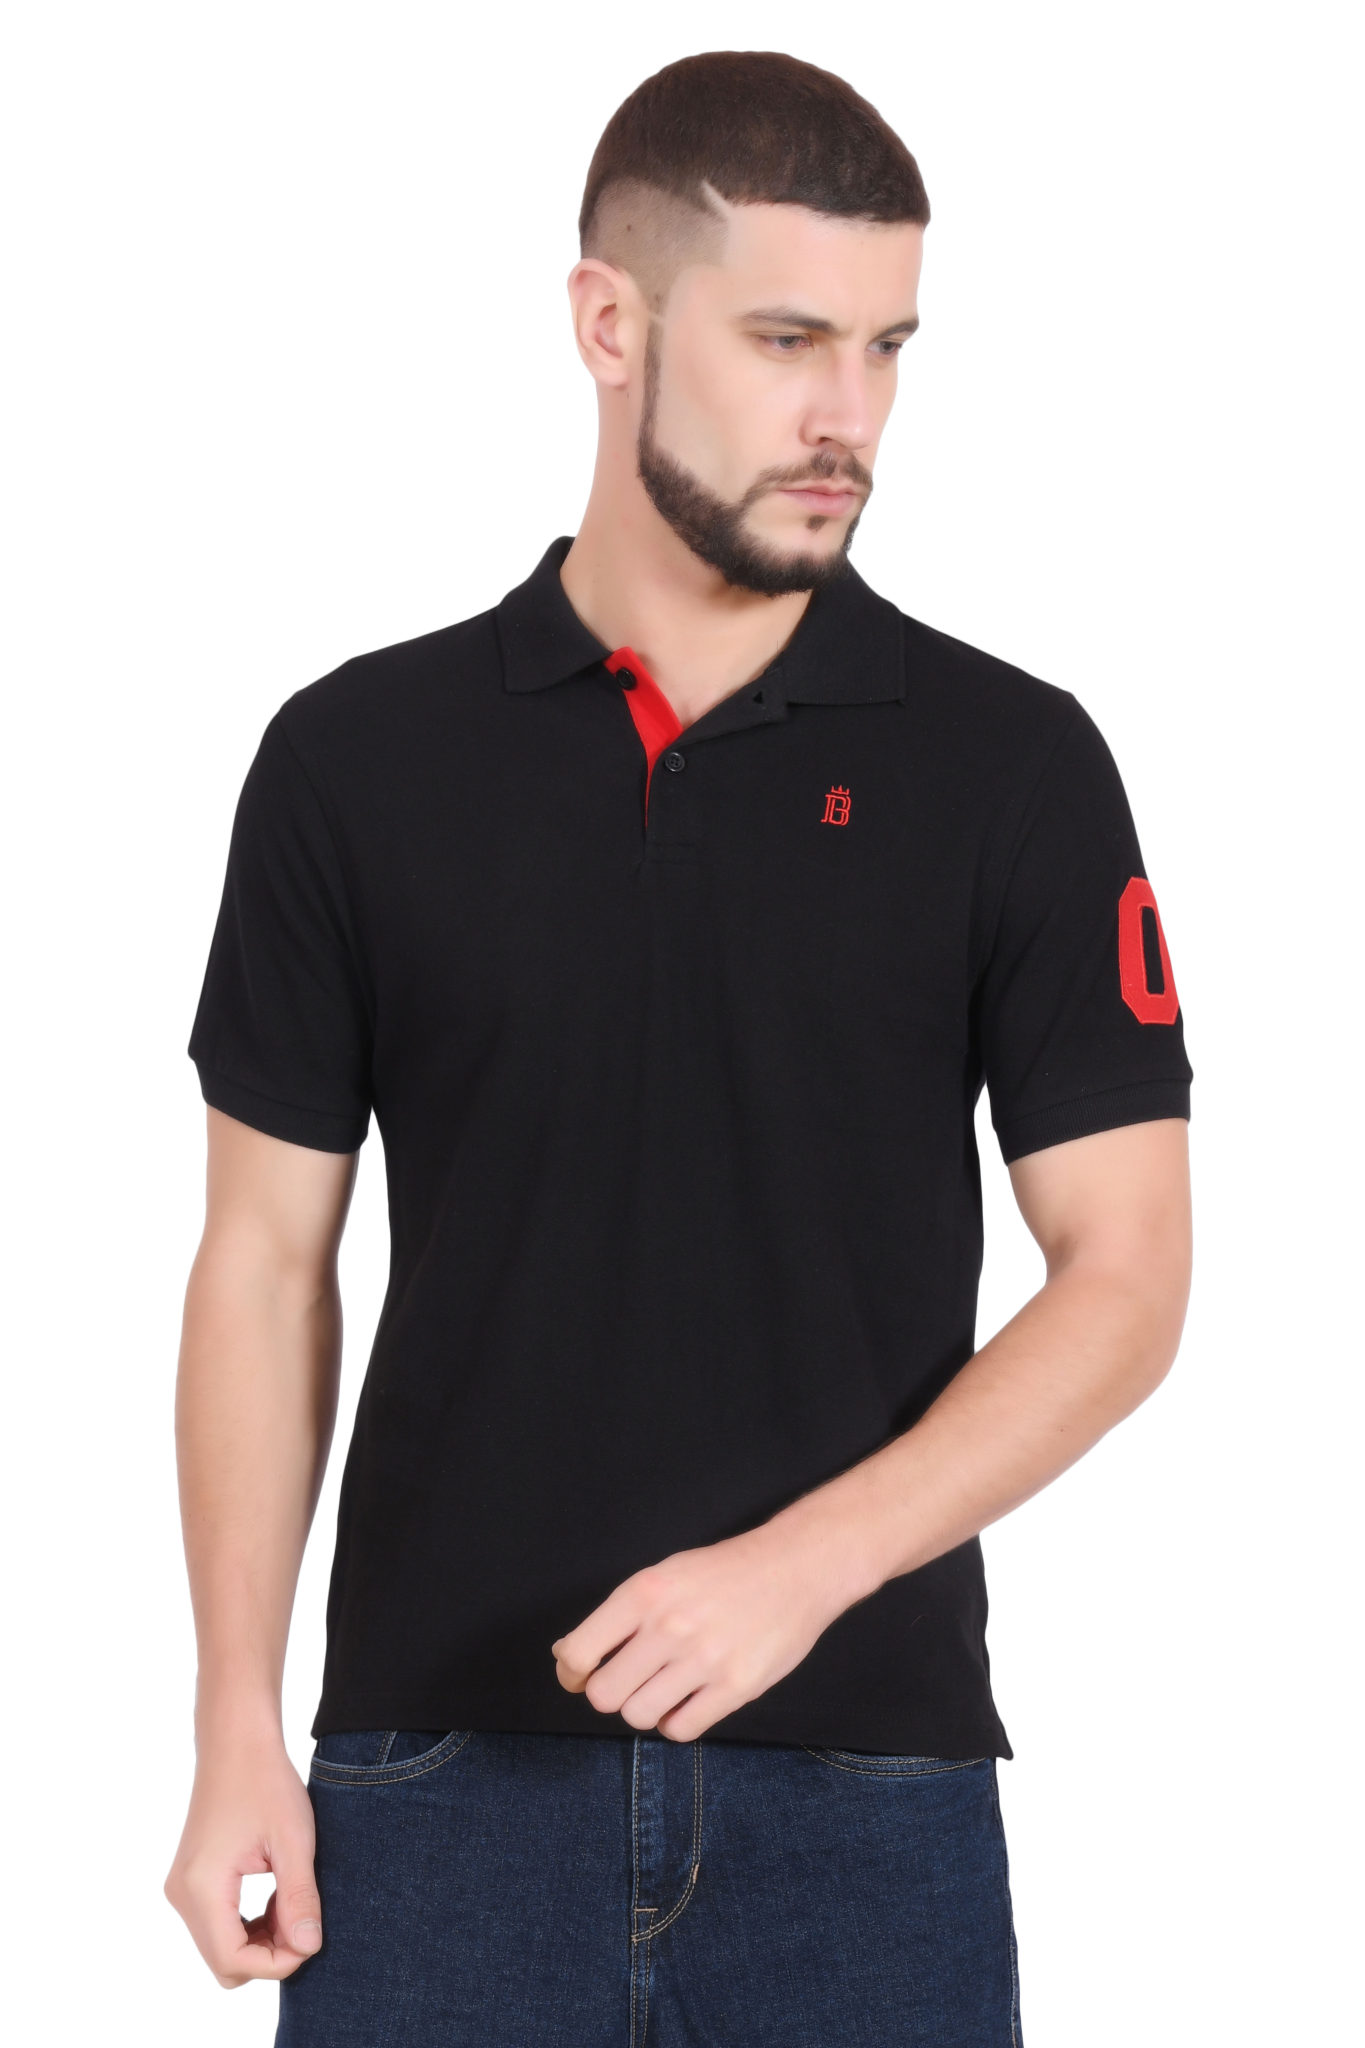 Cotton Polo T Shirt For Men. Plain Solid Design With Collar Black Front Right 